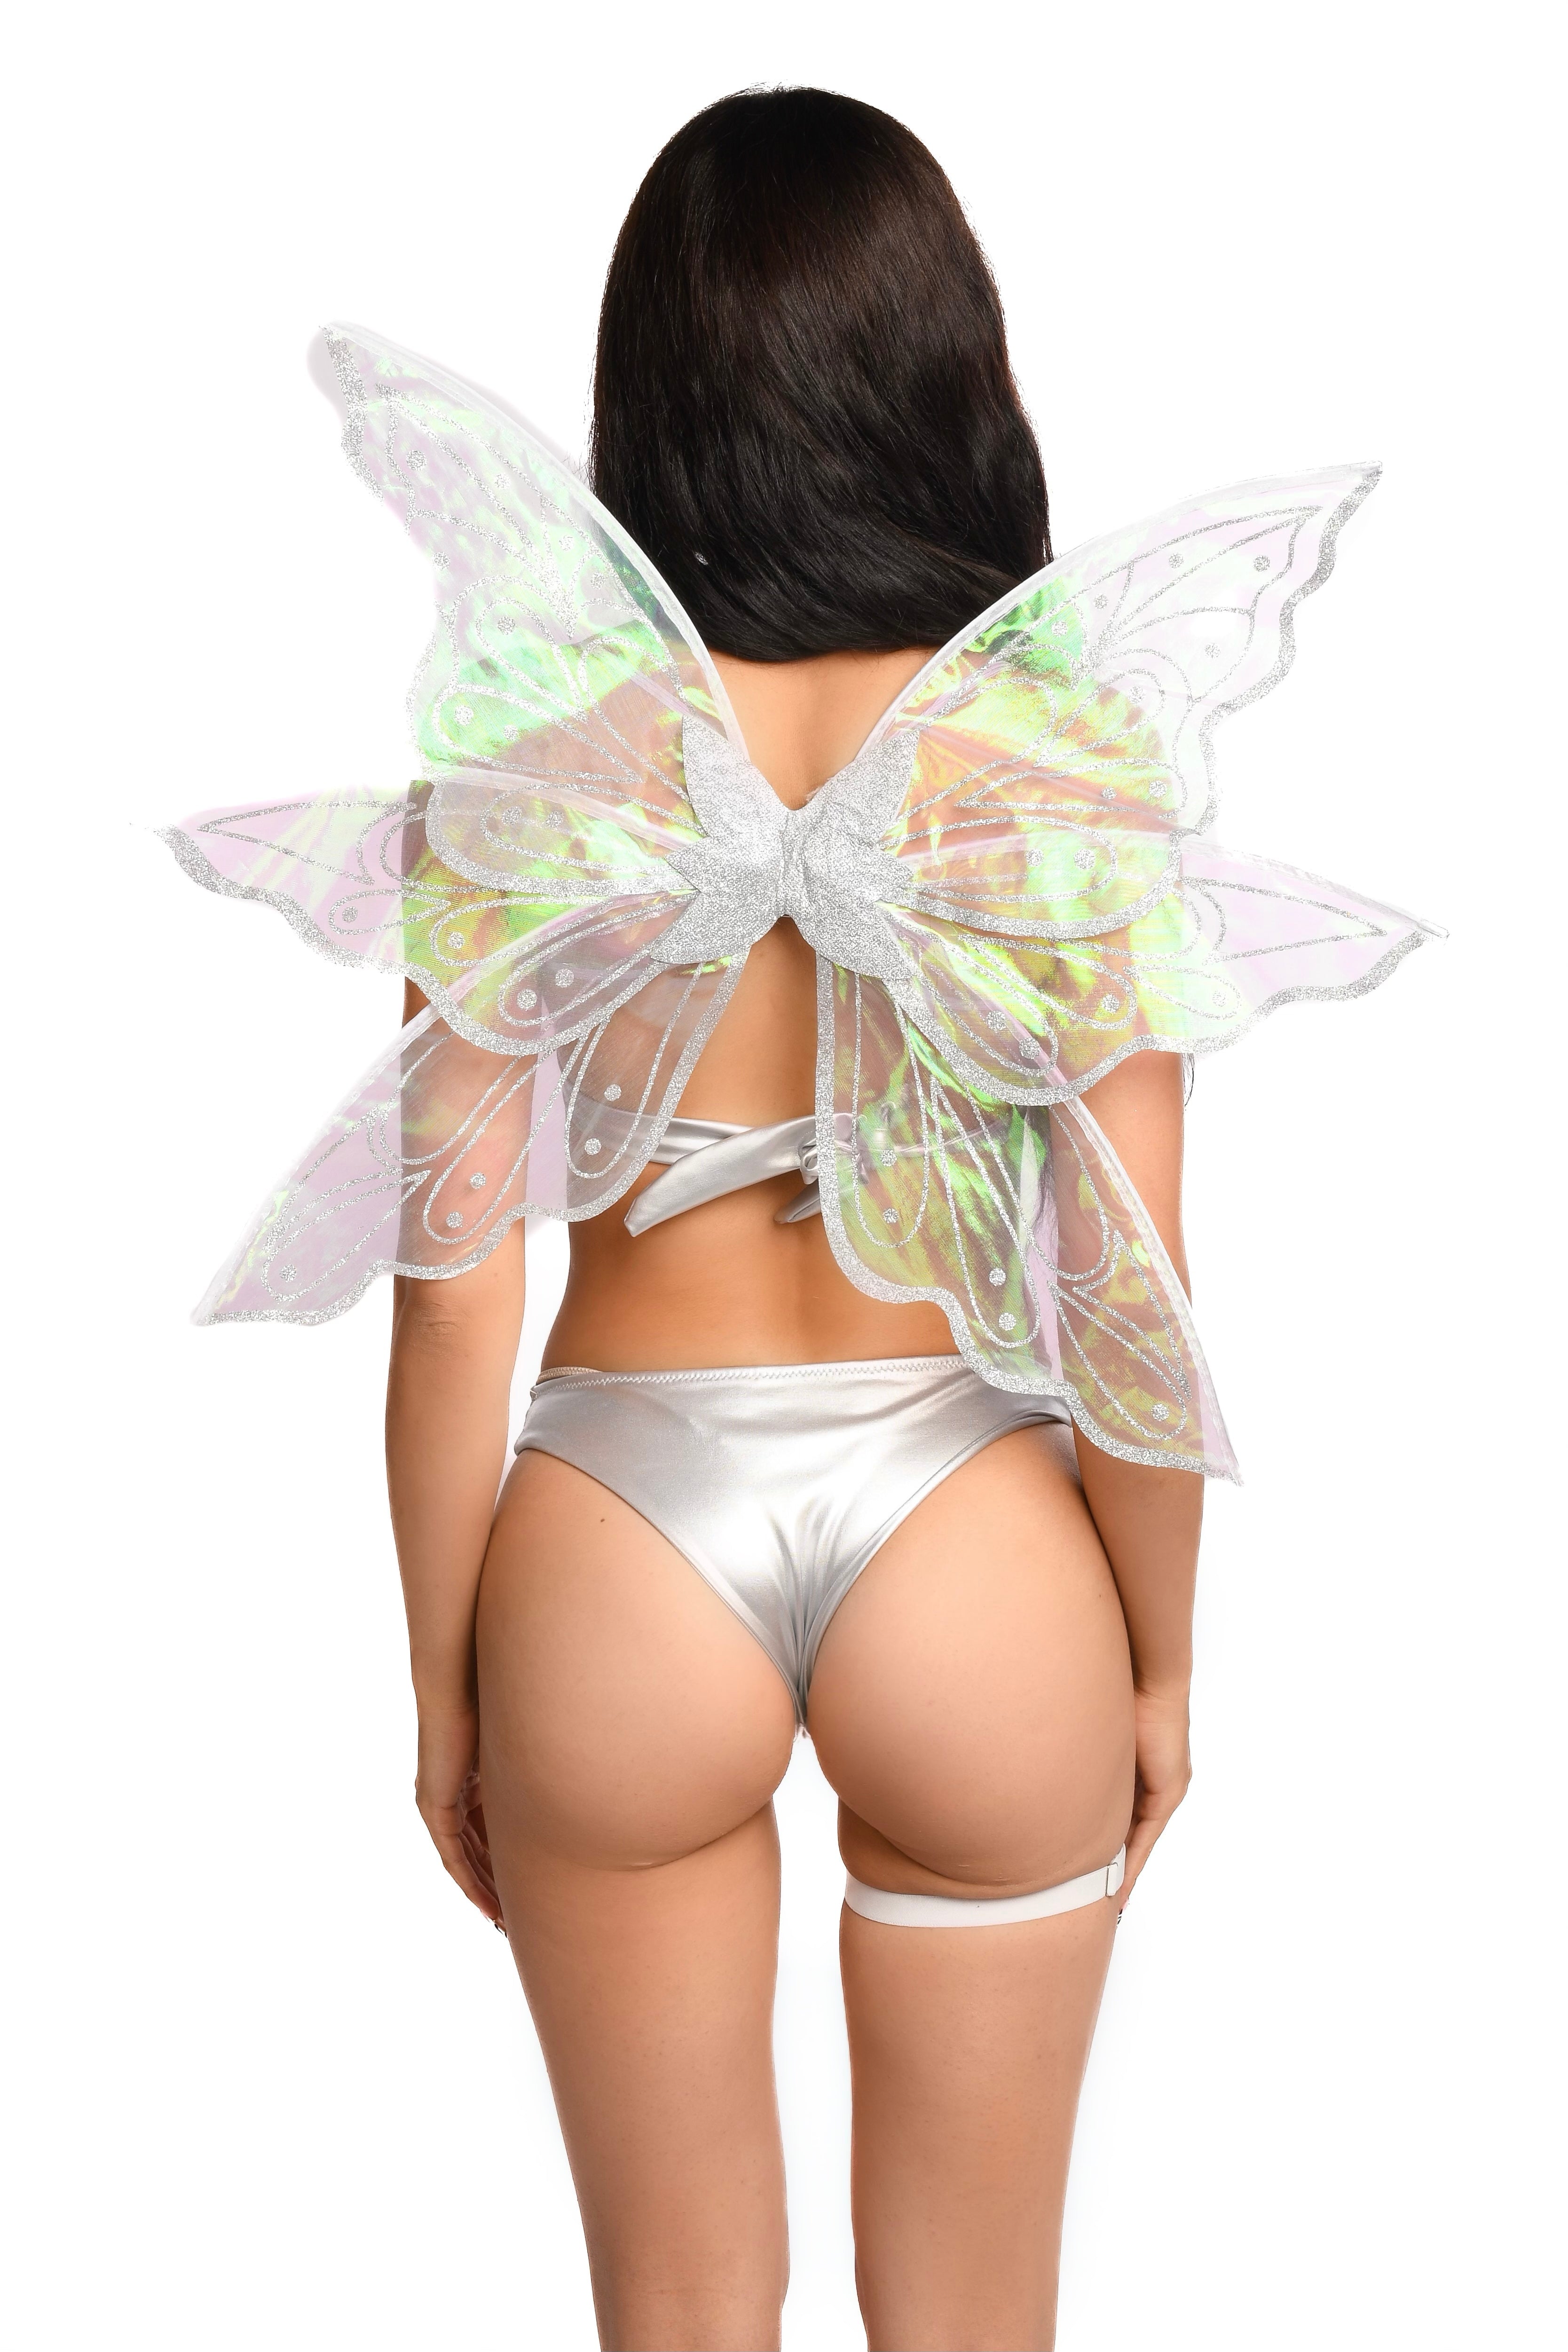 FULL OUTFIT- Disco Fairy Rave clothes,rave outfits,edc outfits